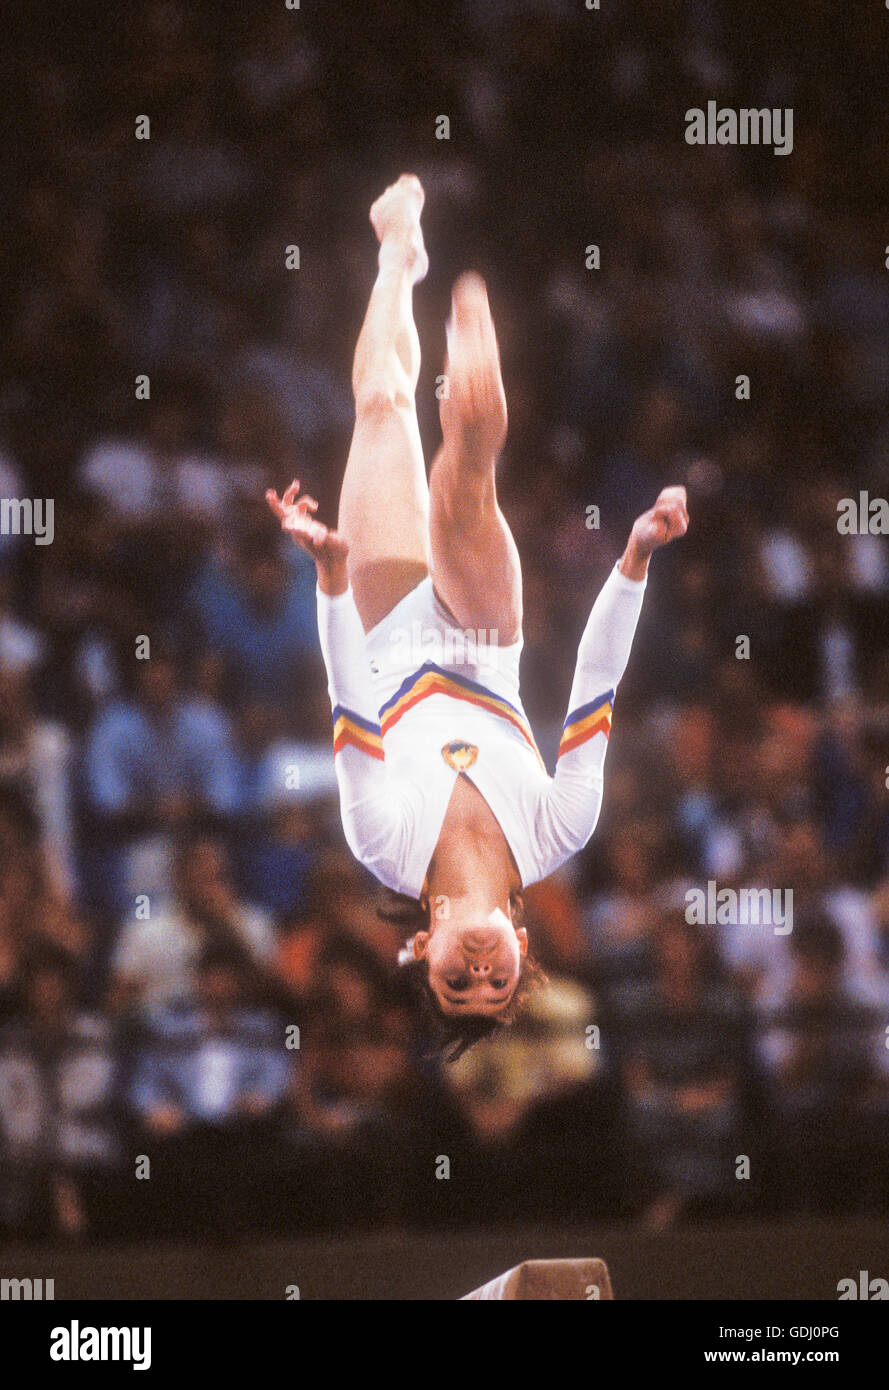 Romanian gymnast performs on balance beam during competition at 1984 Olympic Games in Los Angeles. Stock Photo